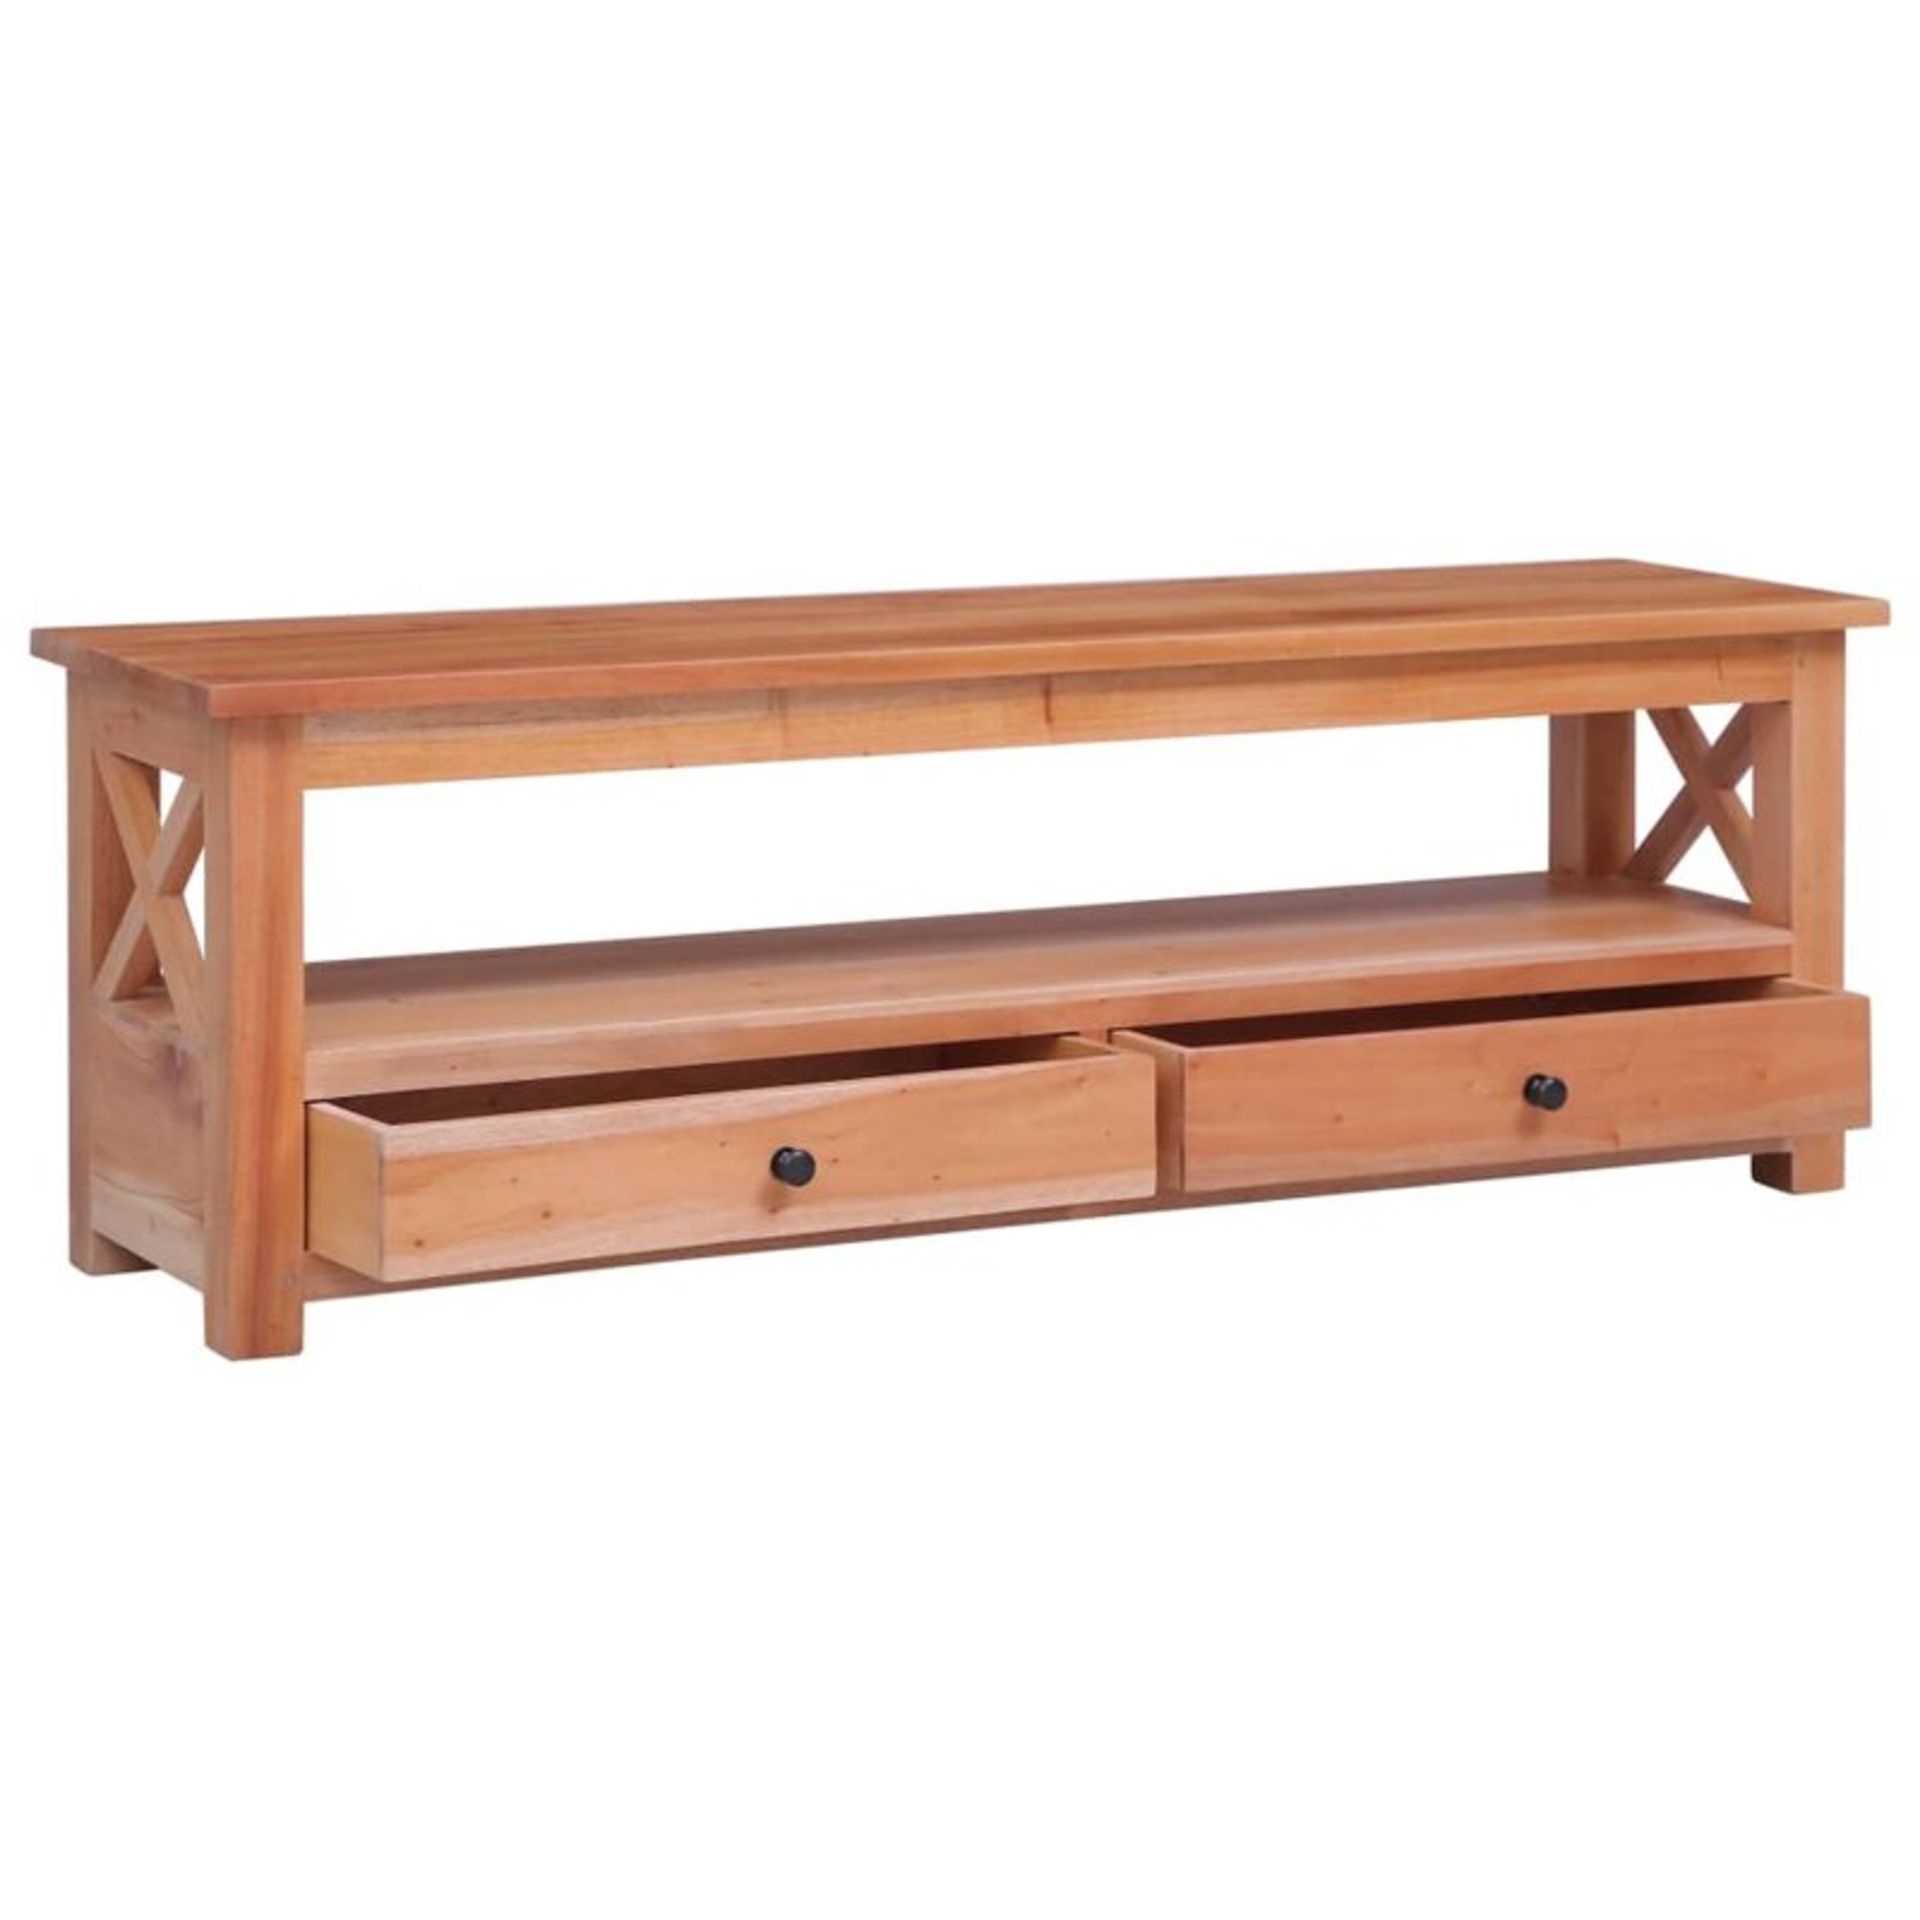 Hinkson Solid Wood TV Stand for TVs up to 50" - RRP £197.99. - Image 2 of 5